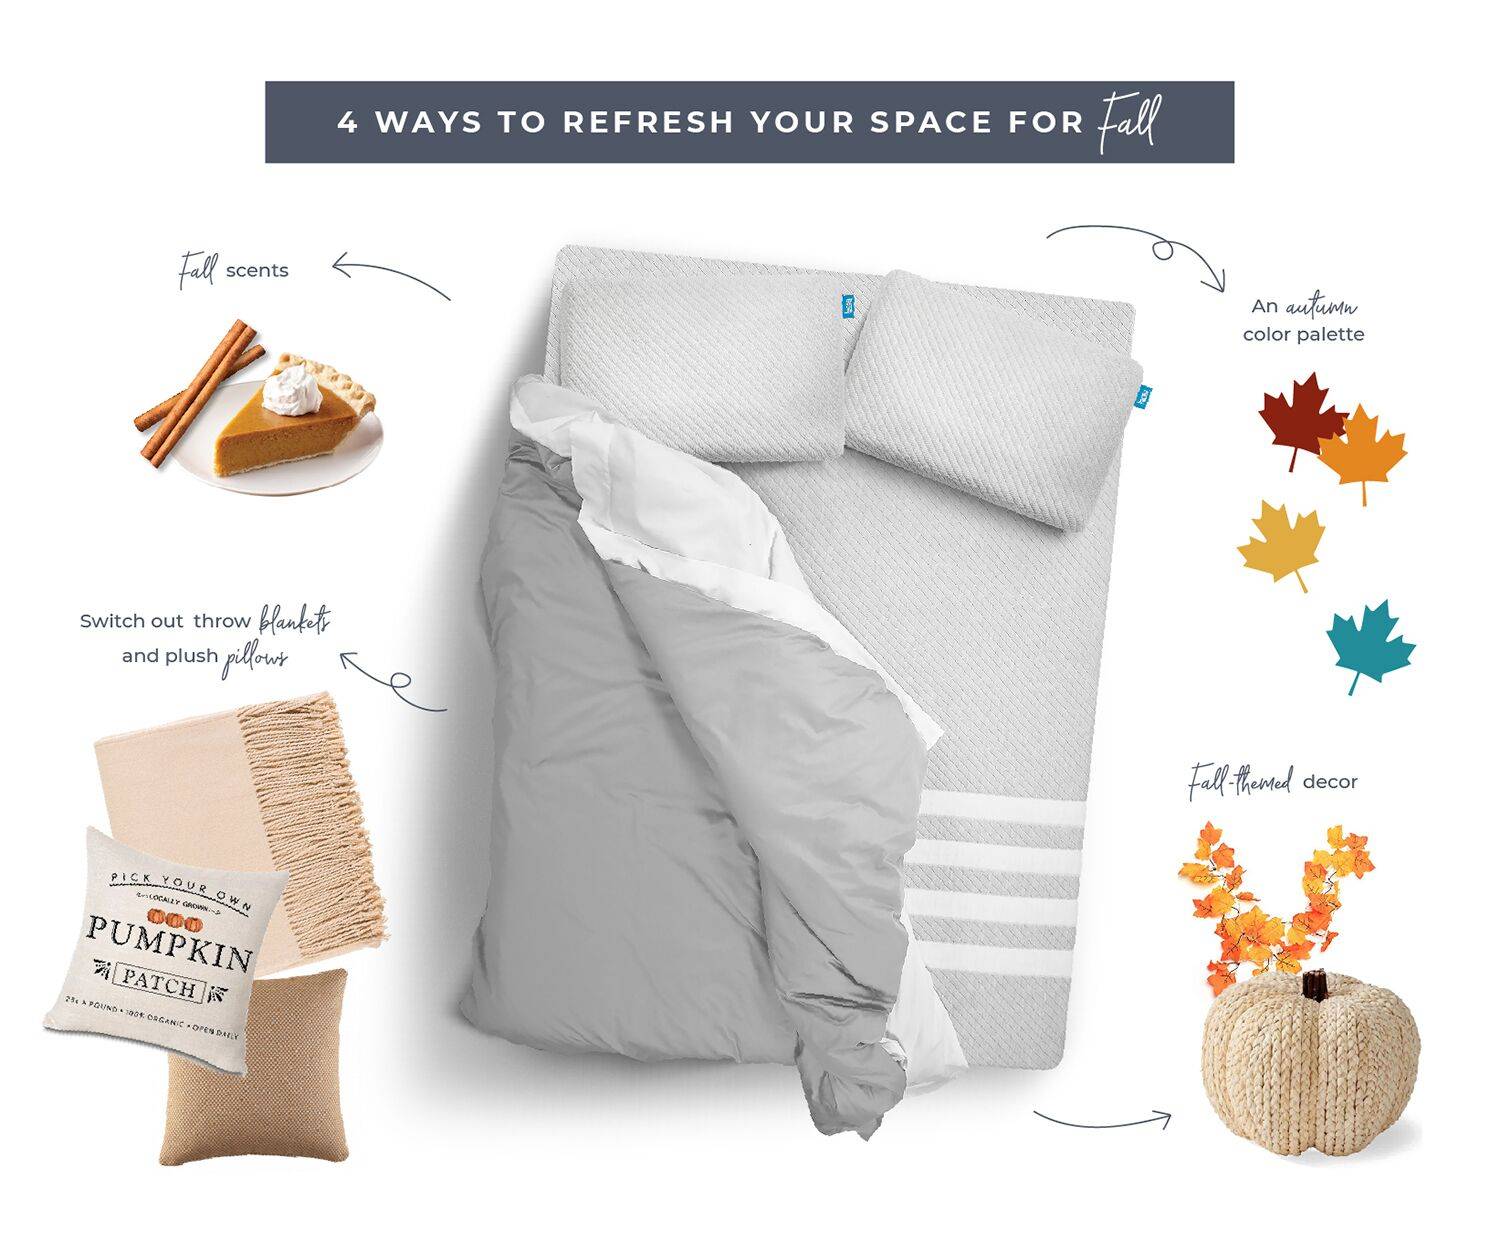 4 ways to refresh your space for Fall